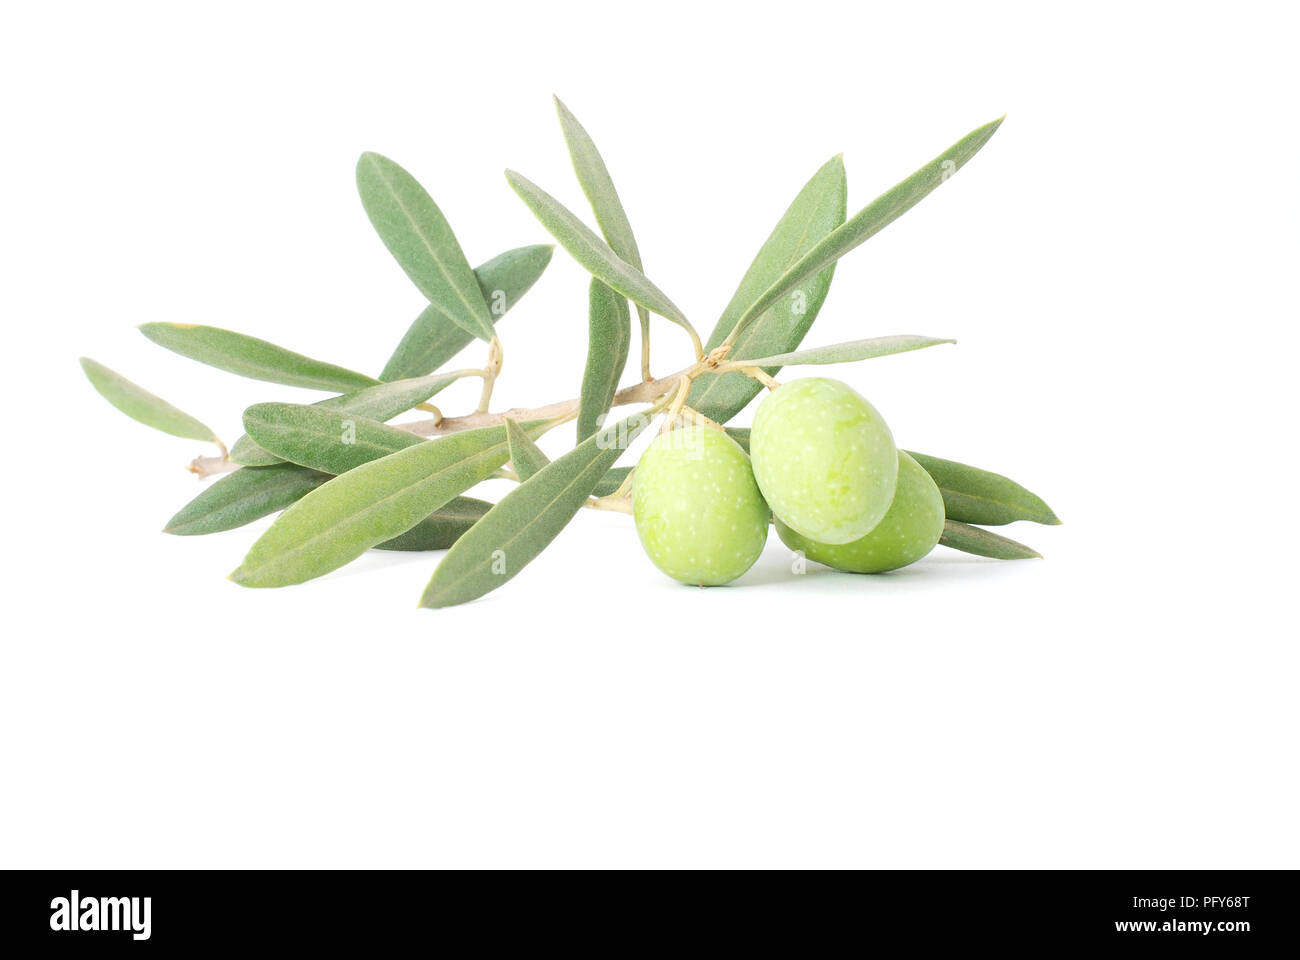 A twig of green olives with leaves isolated on a white background. Stock Photo